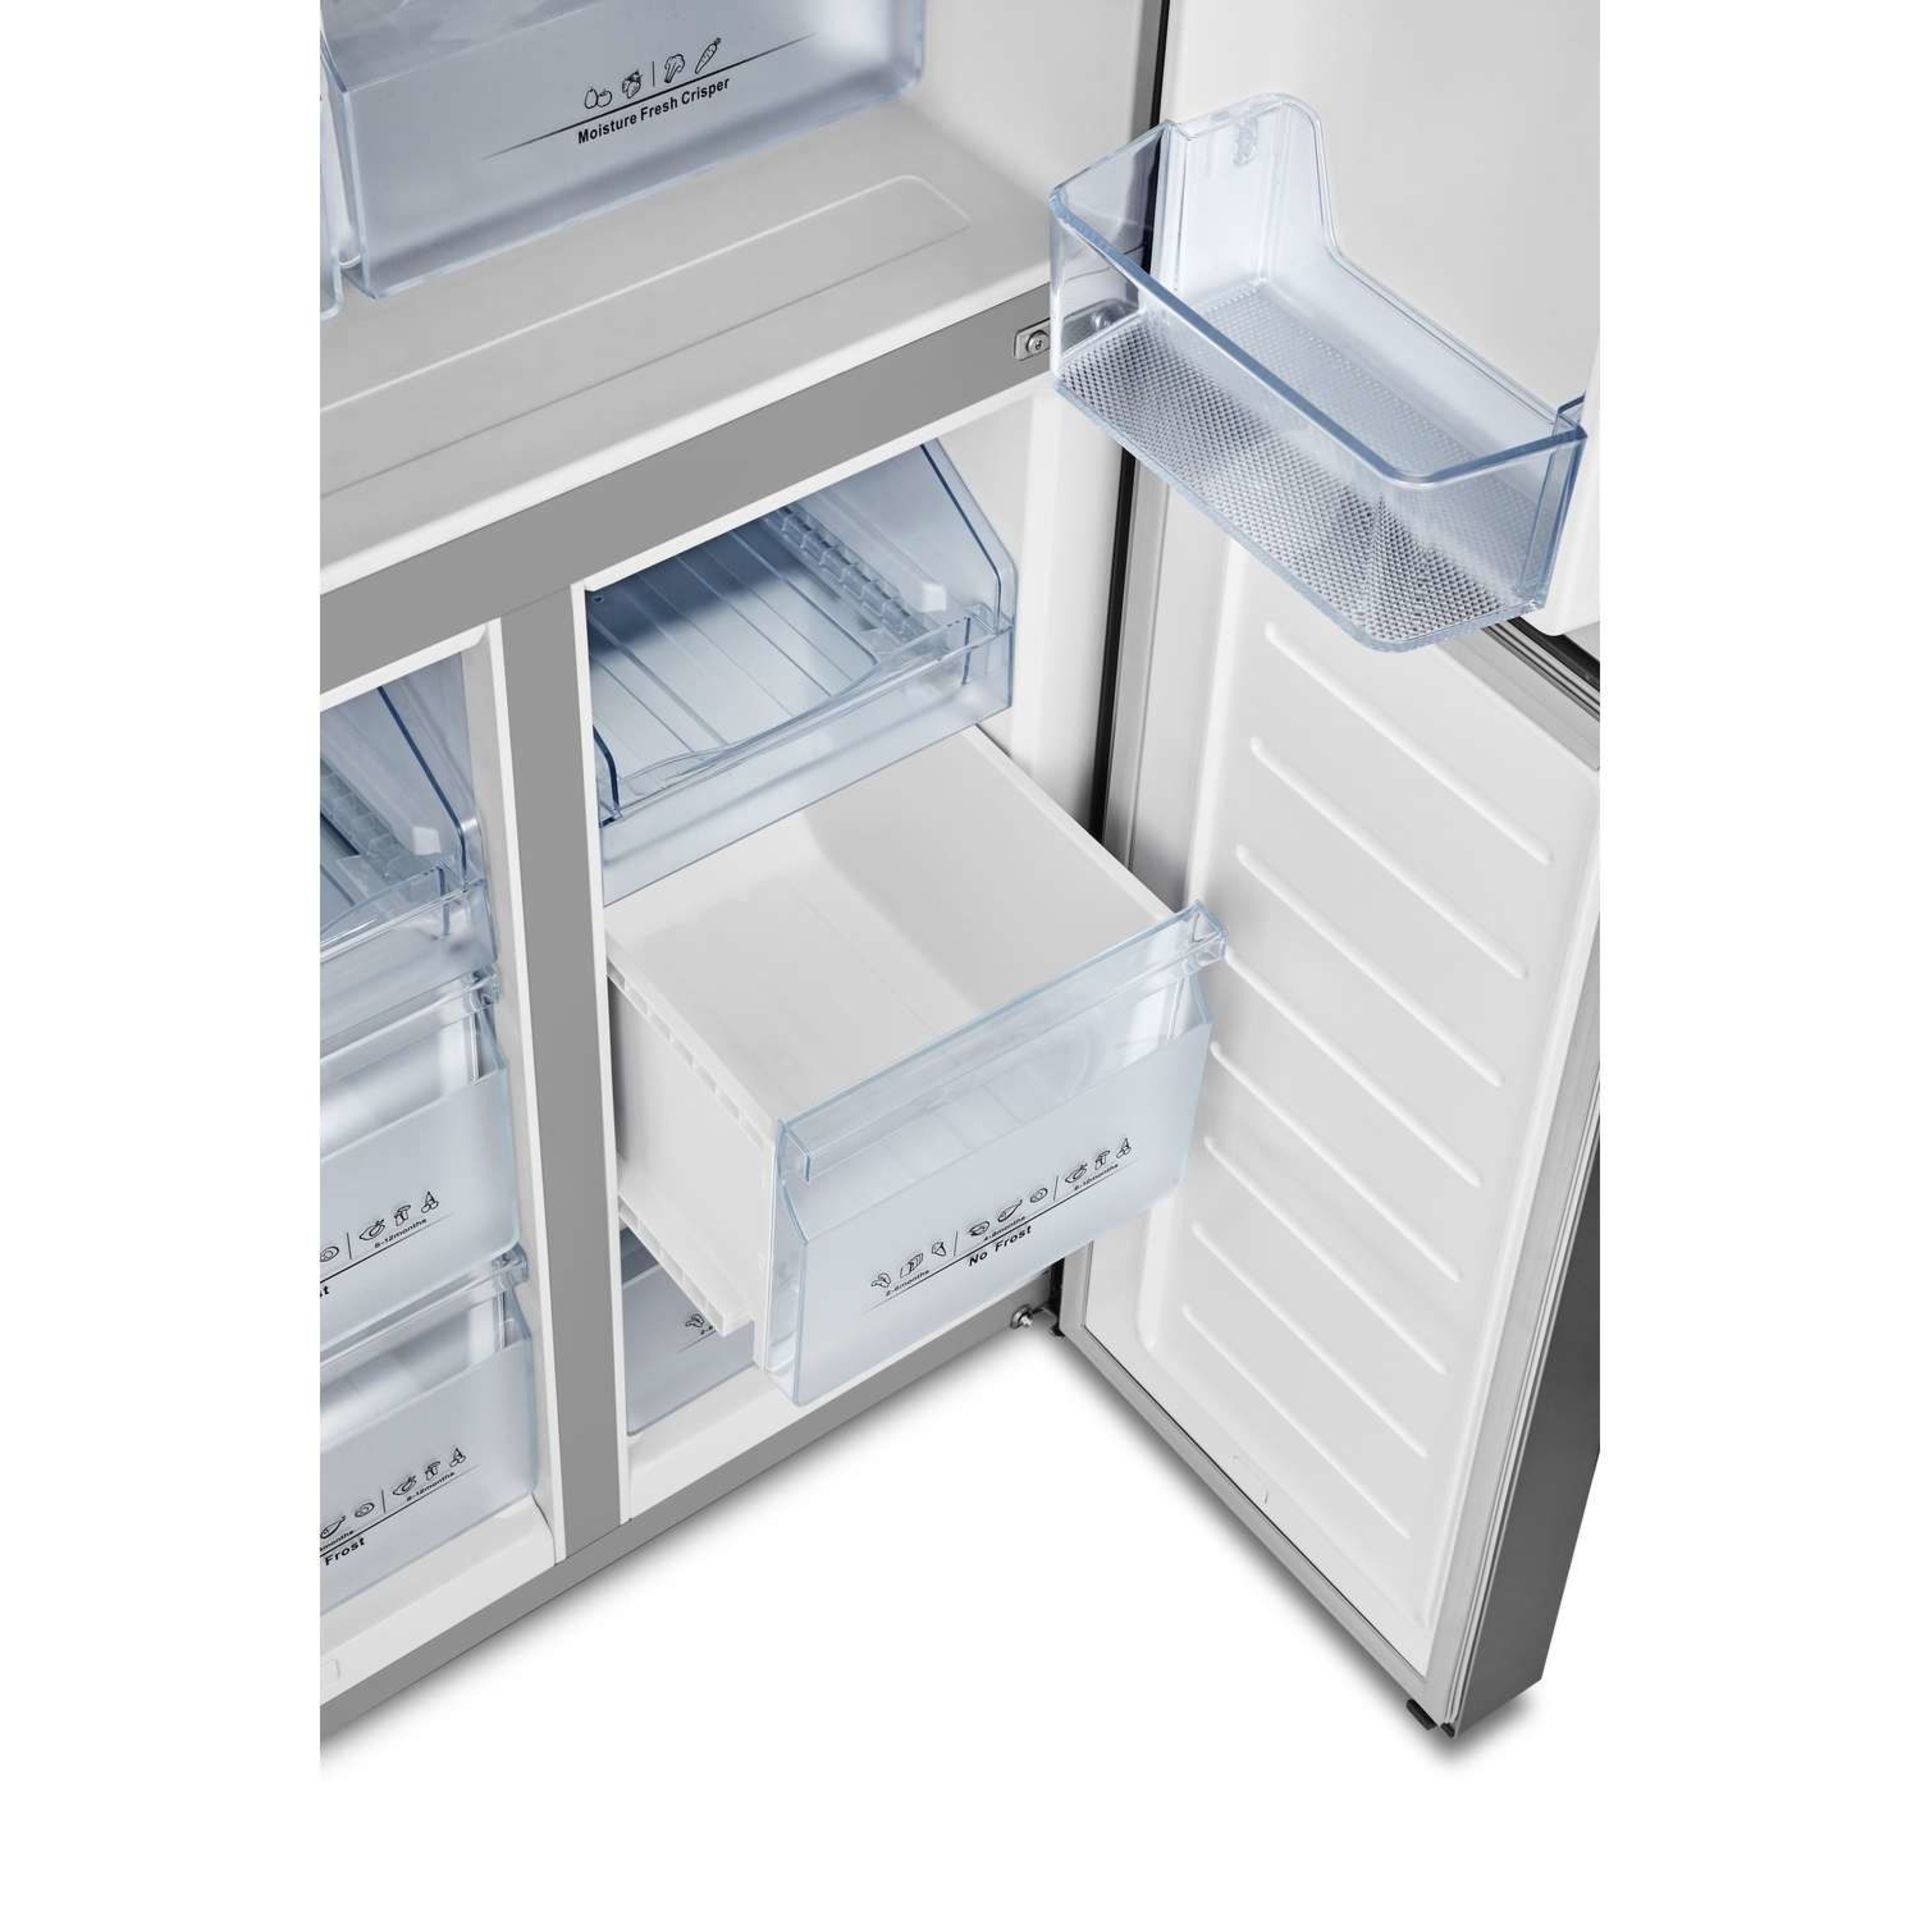 Hisense 432 Litre Four Door American Fridge Freezer With Dual Cooling - Stainless steel. - RRP £ - Image 3 of 3